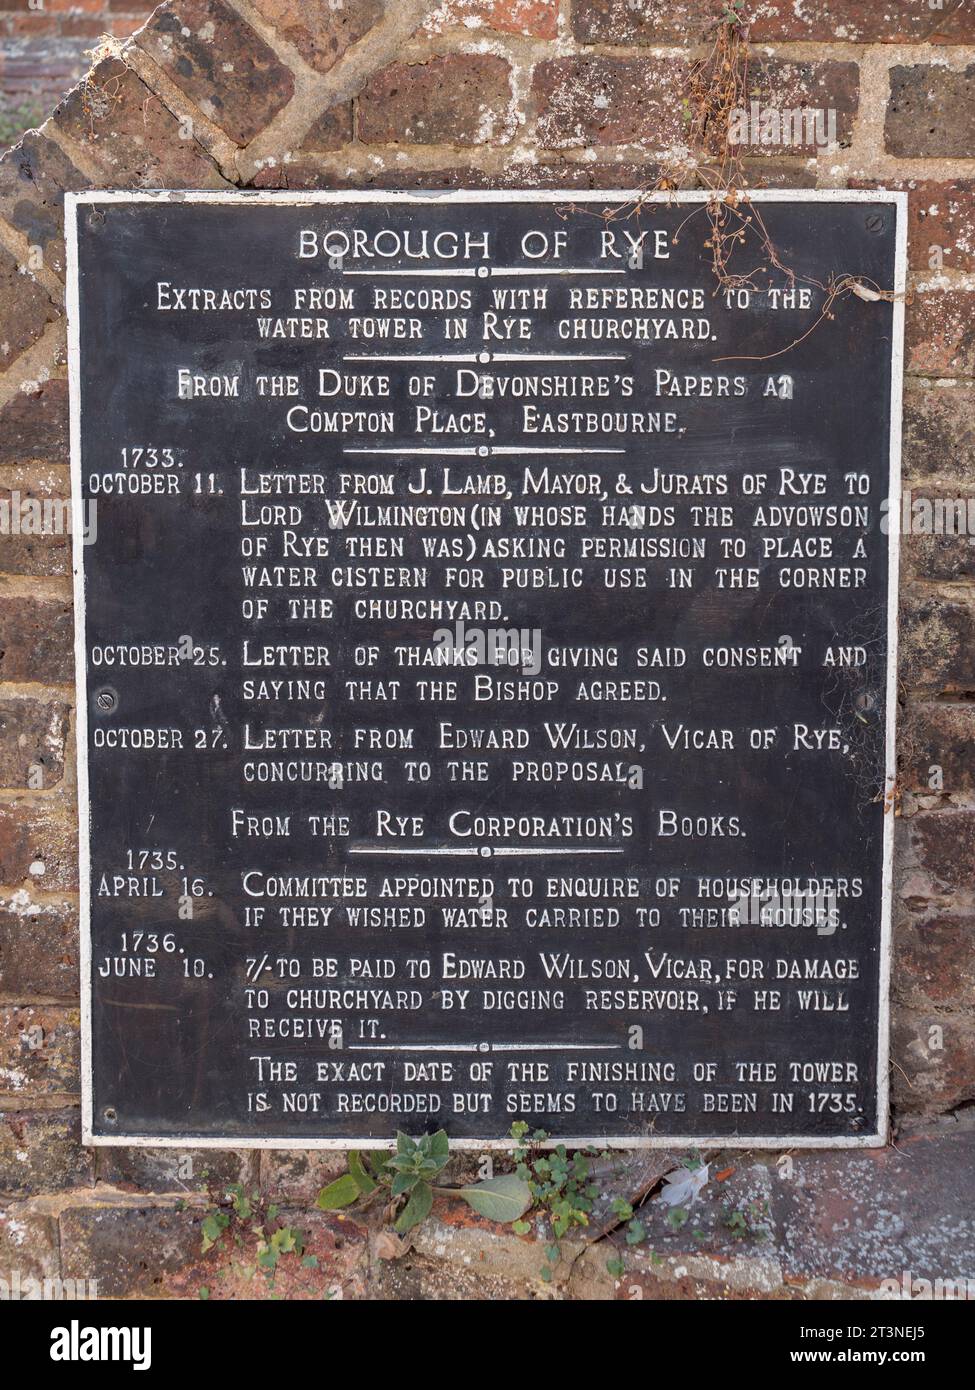 Plaque marking the water tower in the churchyard of the Church of Saint Mary, in Rye, East Sussex, UK. Stock Photo